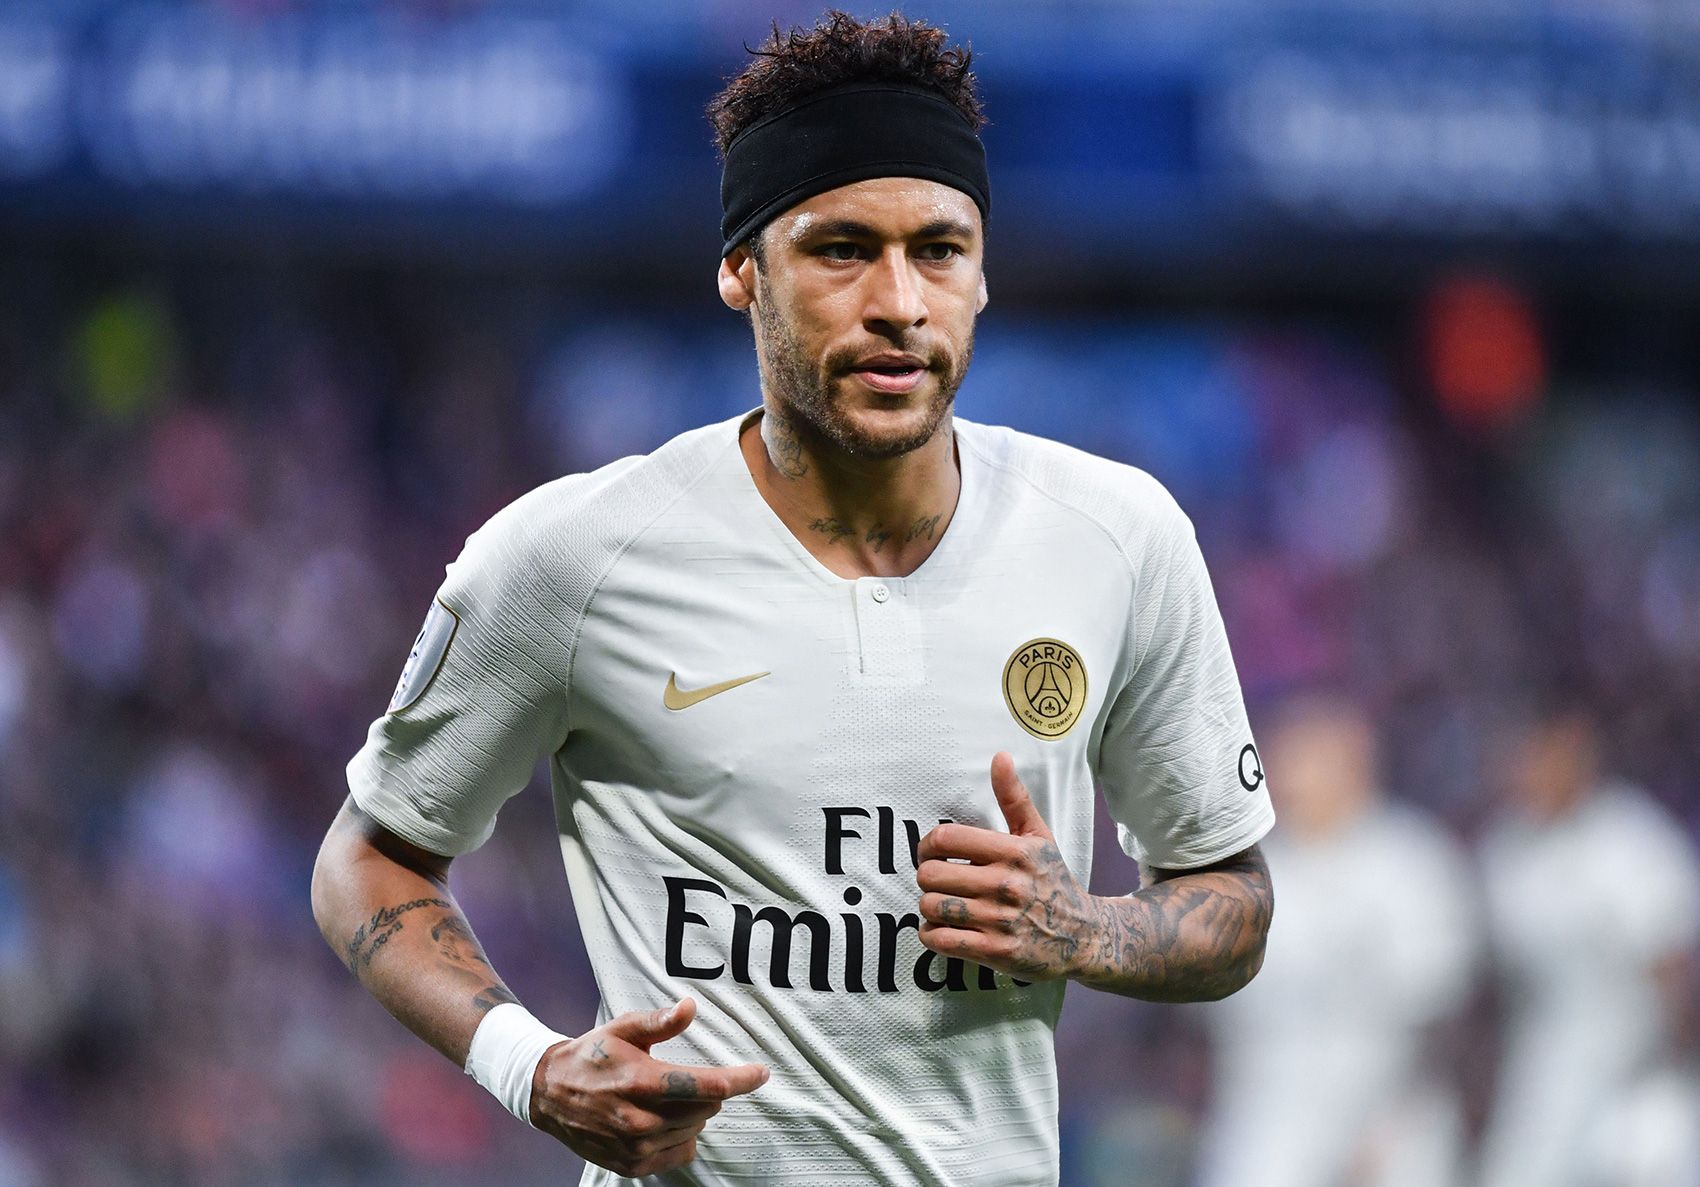 Neymar in a match with PSG in Ligue 1